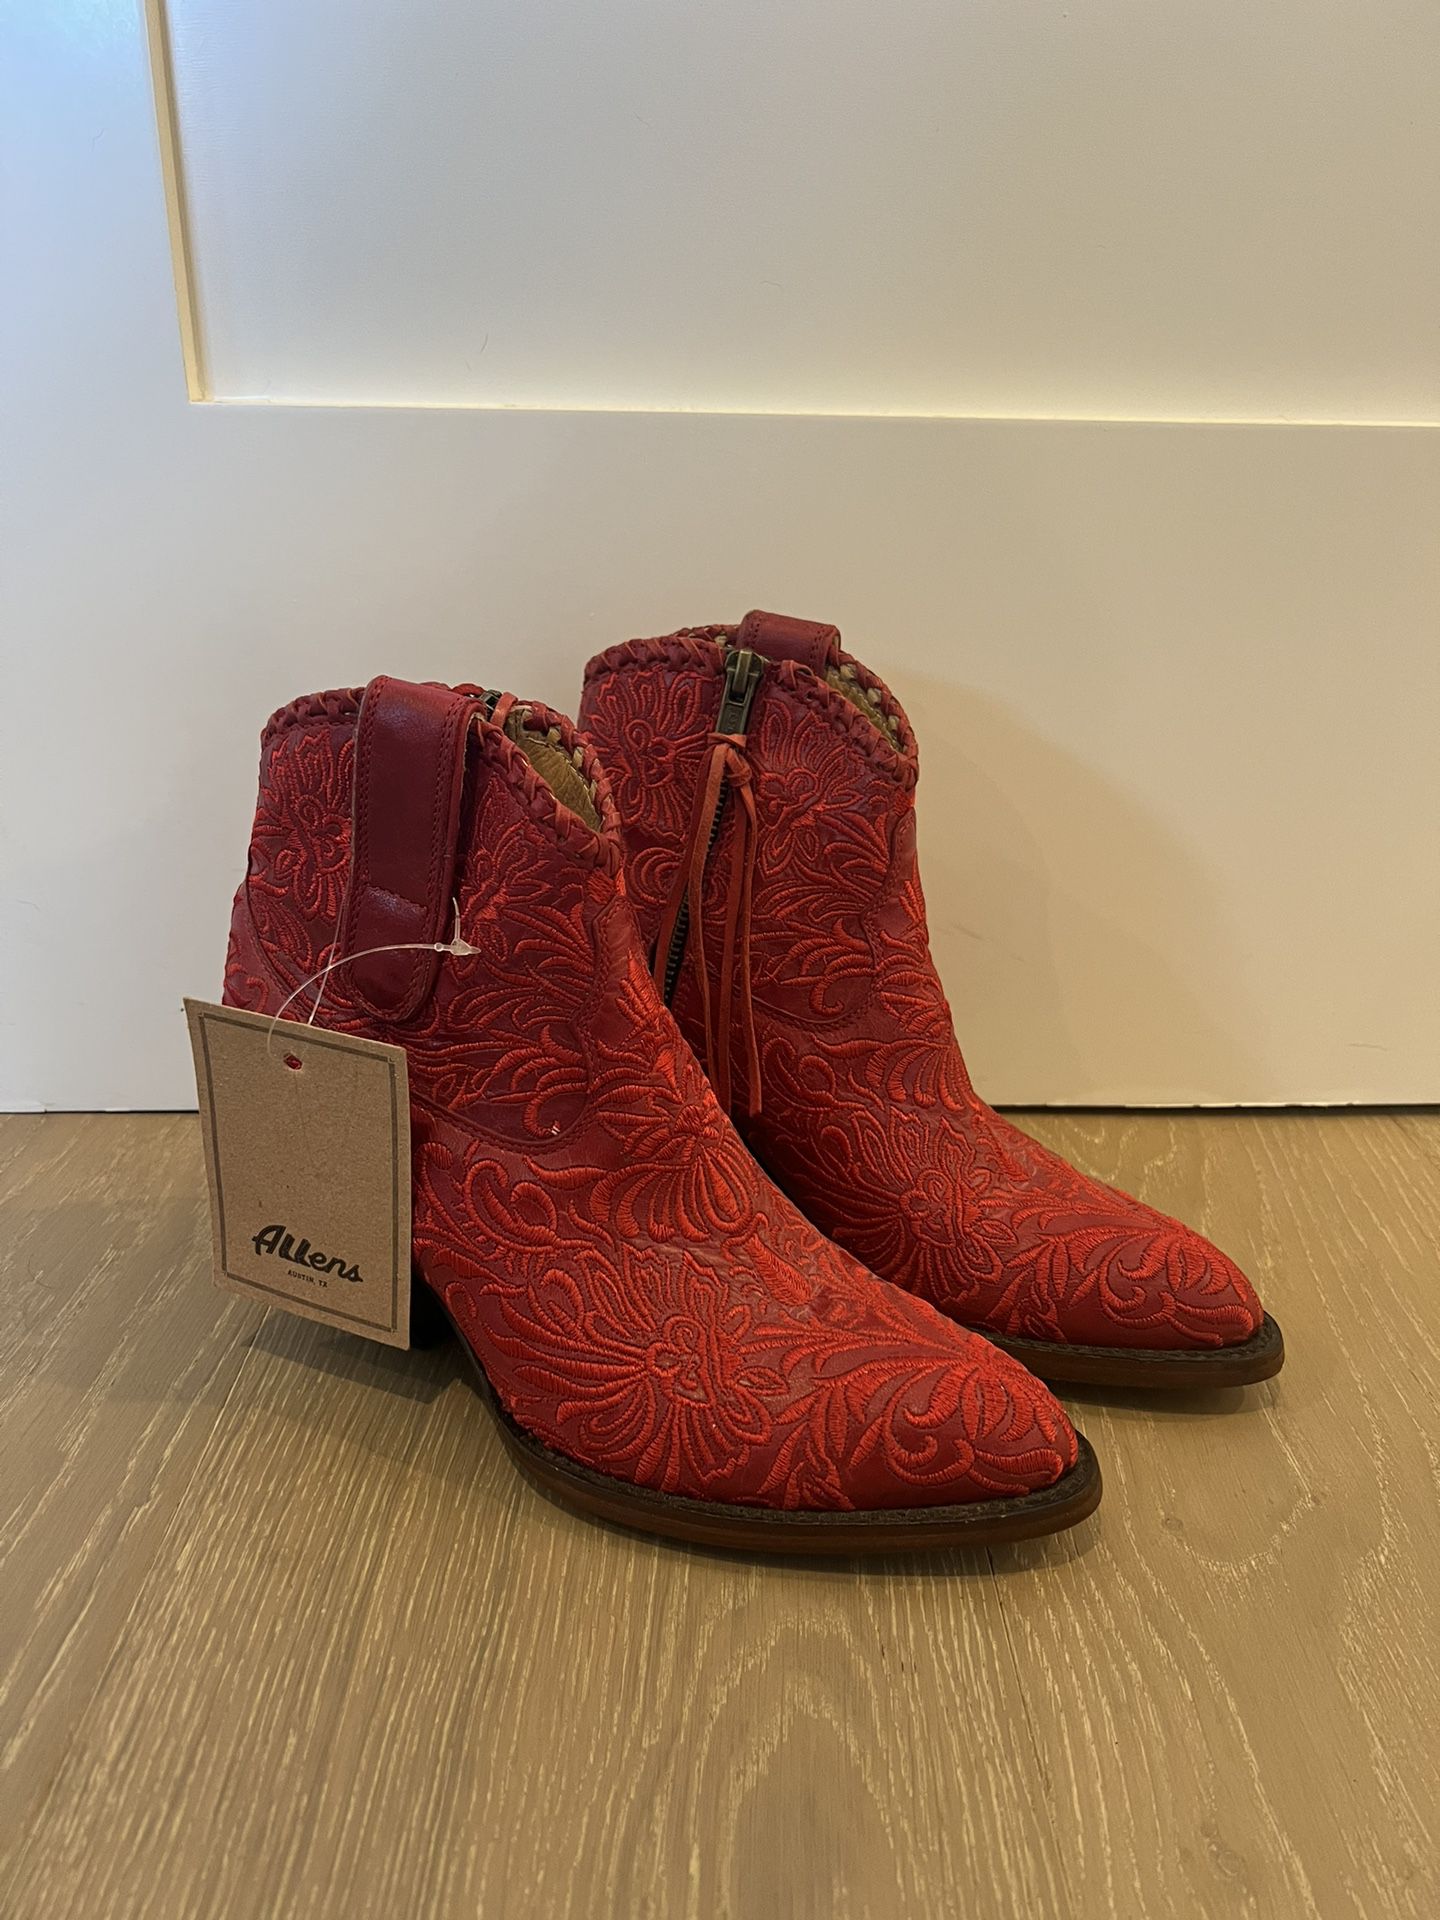 NWT Authentic, High Quality Allen’s Cowboy Boots